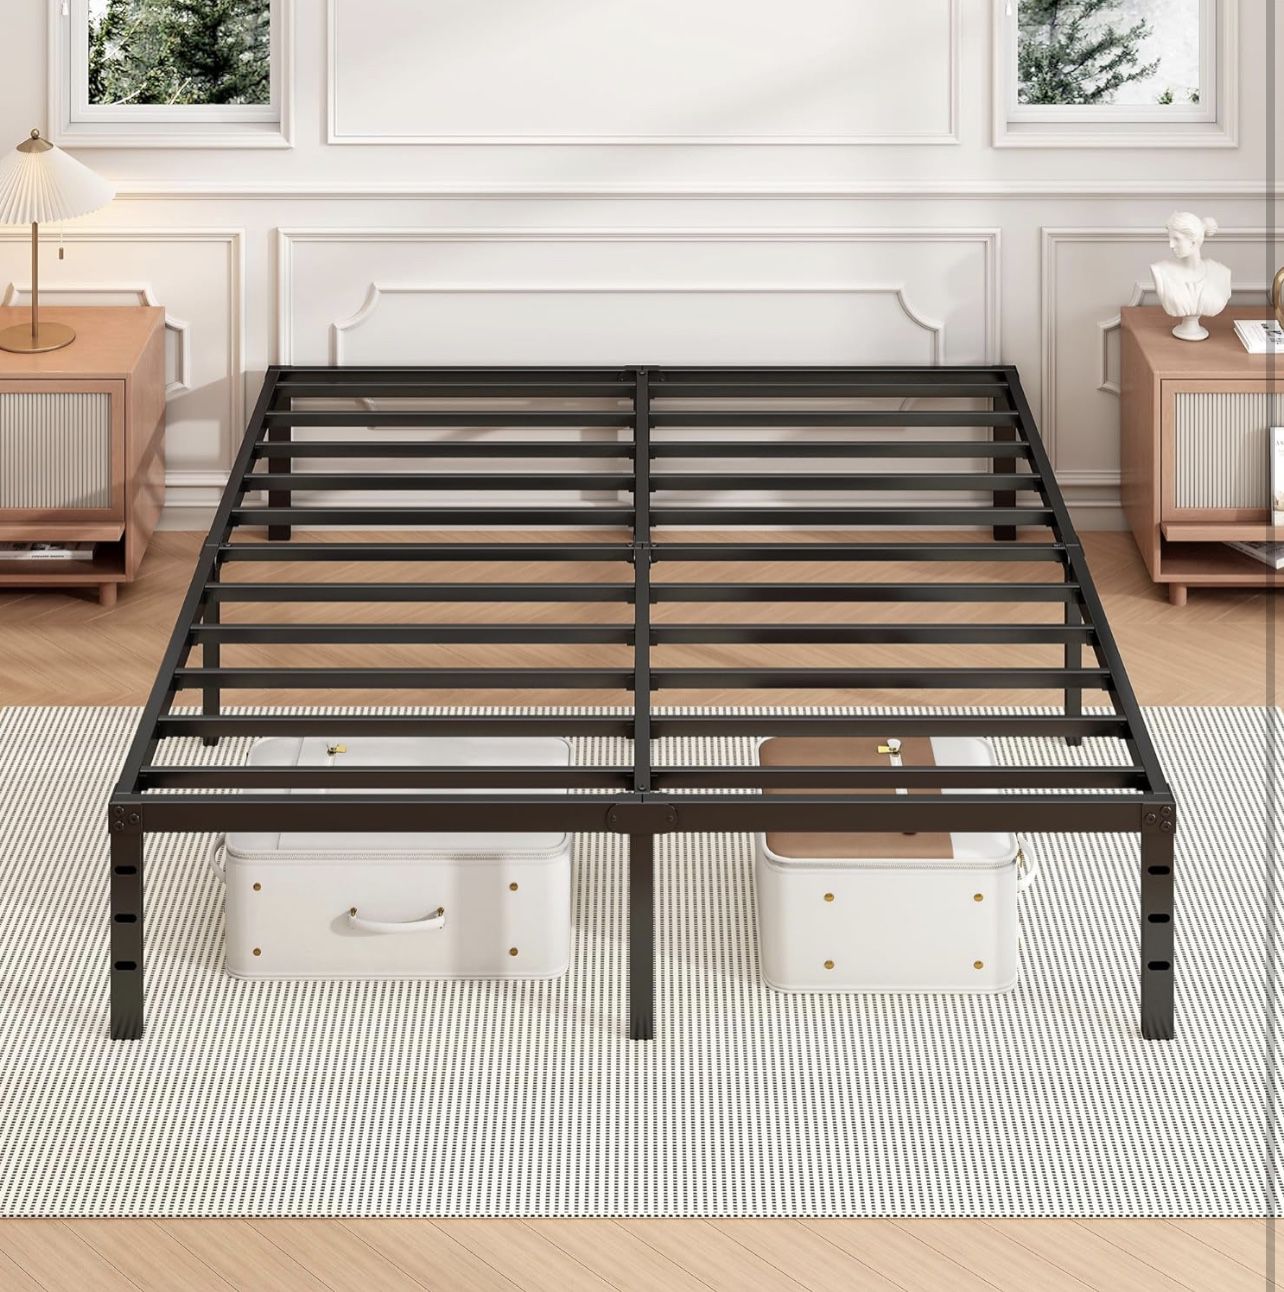 18 Inch Full Bed Frame - Sturdy Platform Bed Frame Metal Bed Frame No Box Spring Needed Heavy Duty Full Size Bed Frame Easy Assembly Strong Bearing Ca